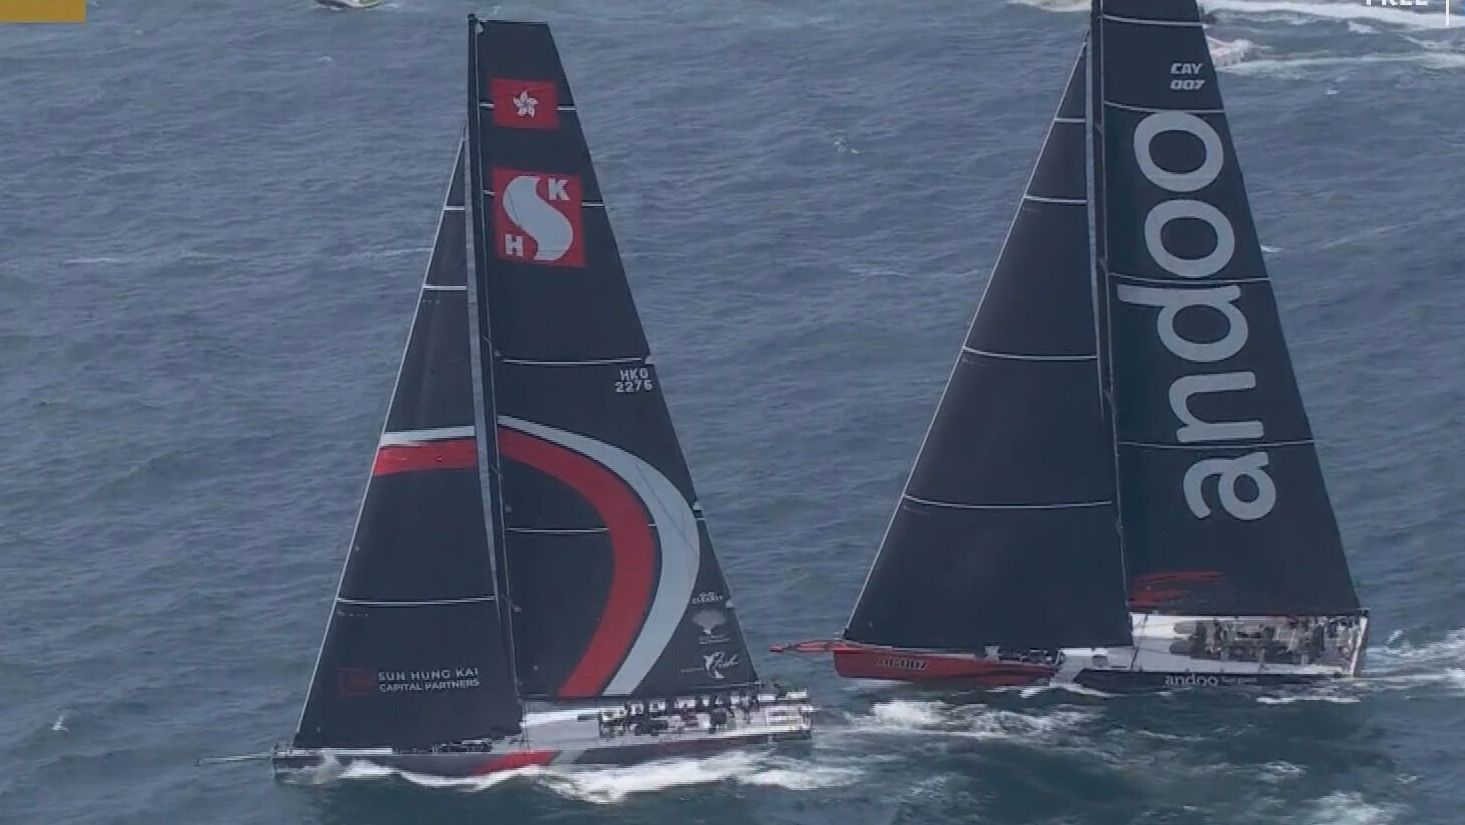 Scallywag almost collided with Andoo Comanche in the Sydney to Hobart.